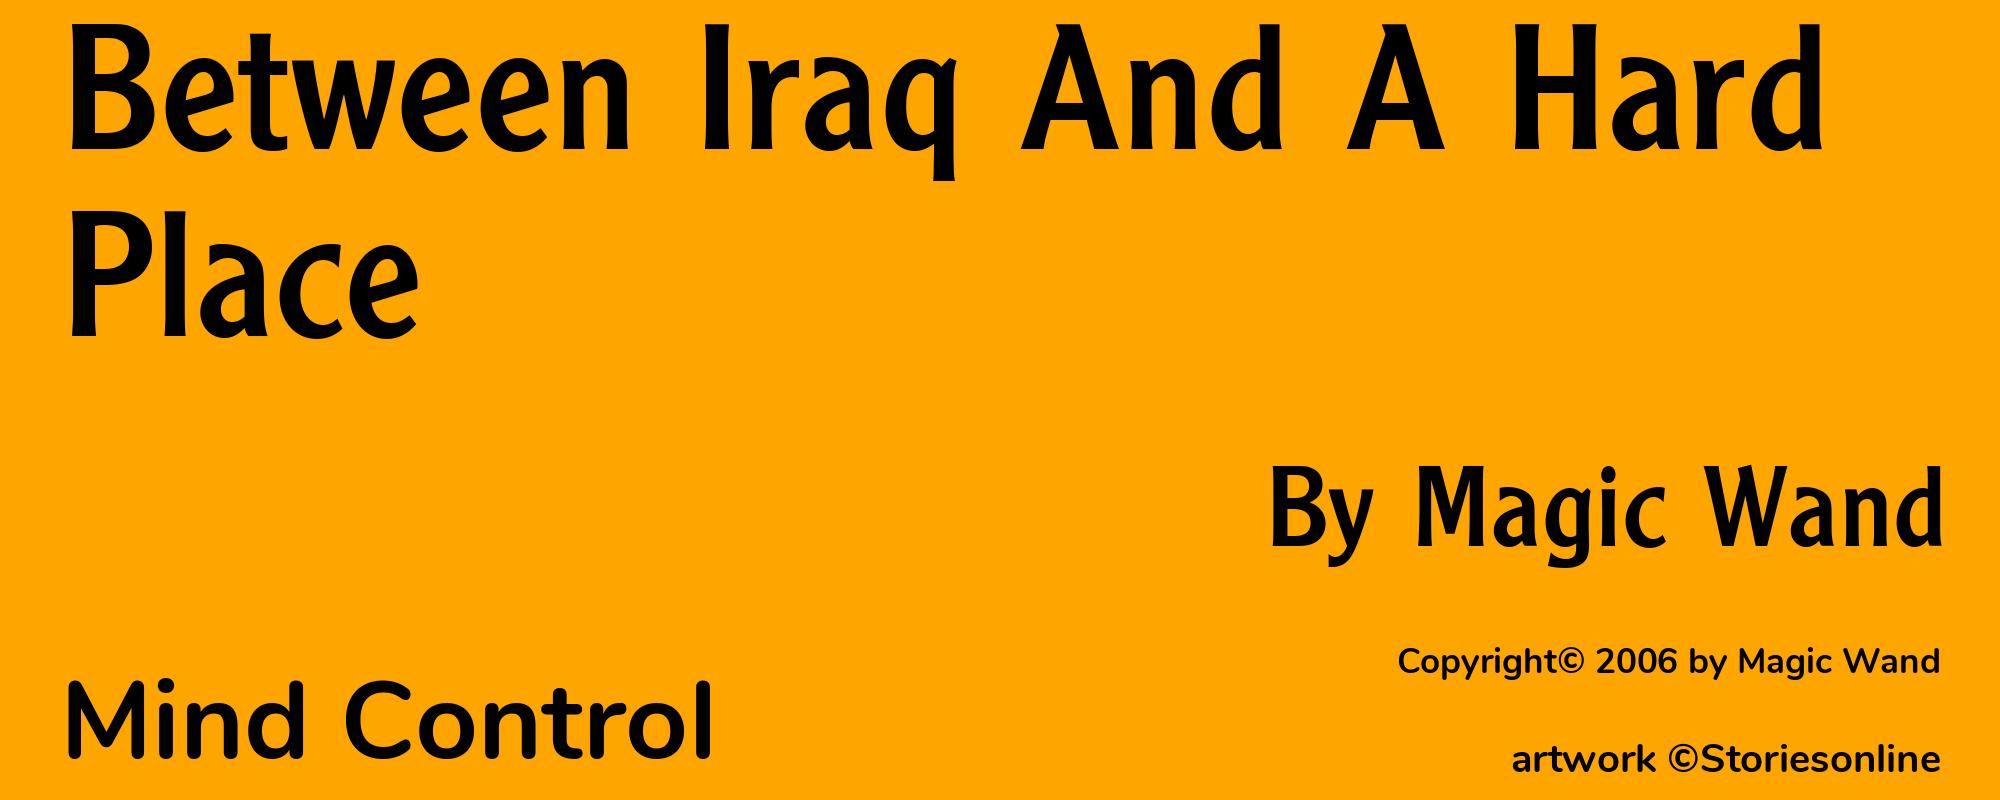 Between Iraq And A Hard Place - Cover